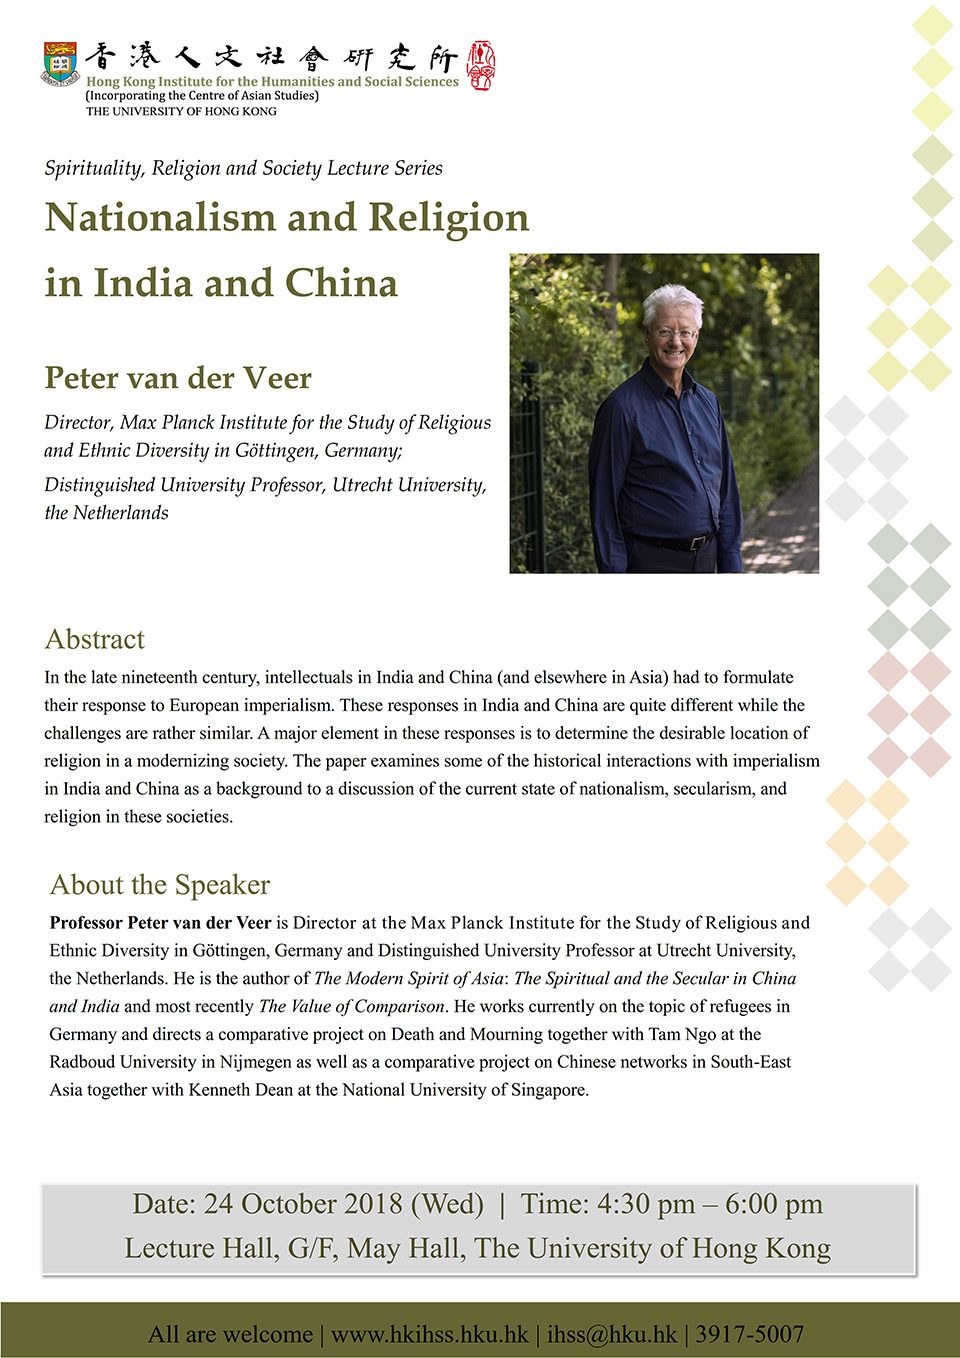 Spirituality, Religion and Society Lecture Series “Nationalism and Religion in India and China” by Professor Peter van der Veer (October 24, 2018)